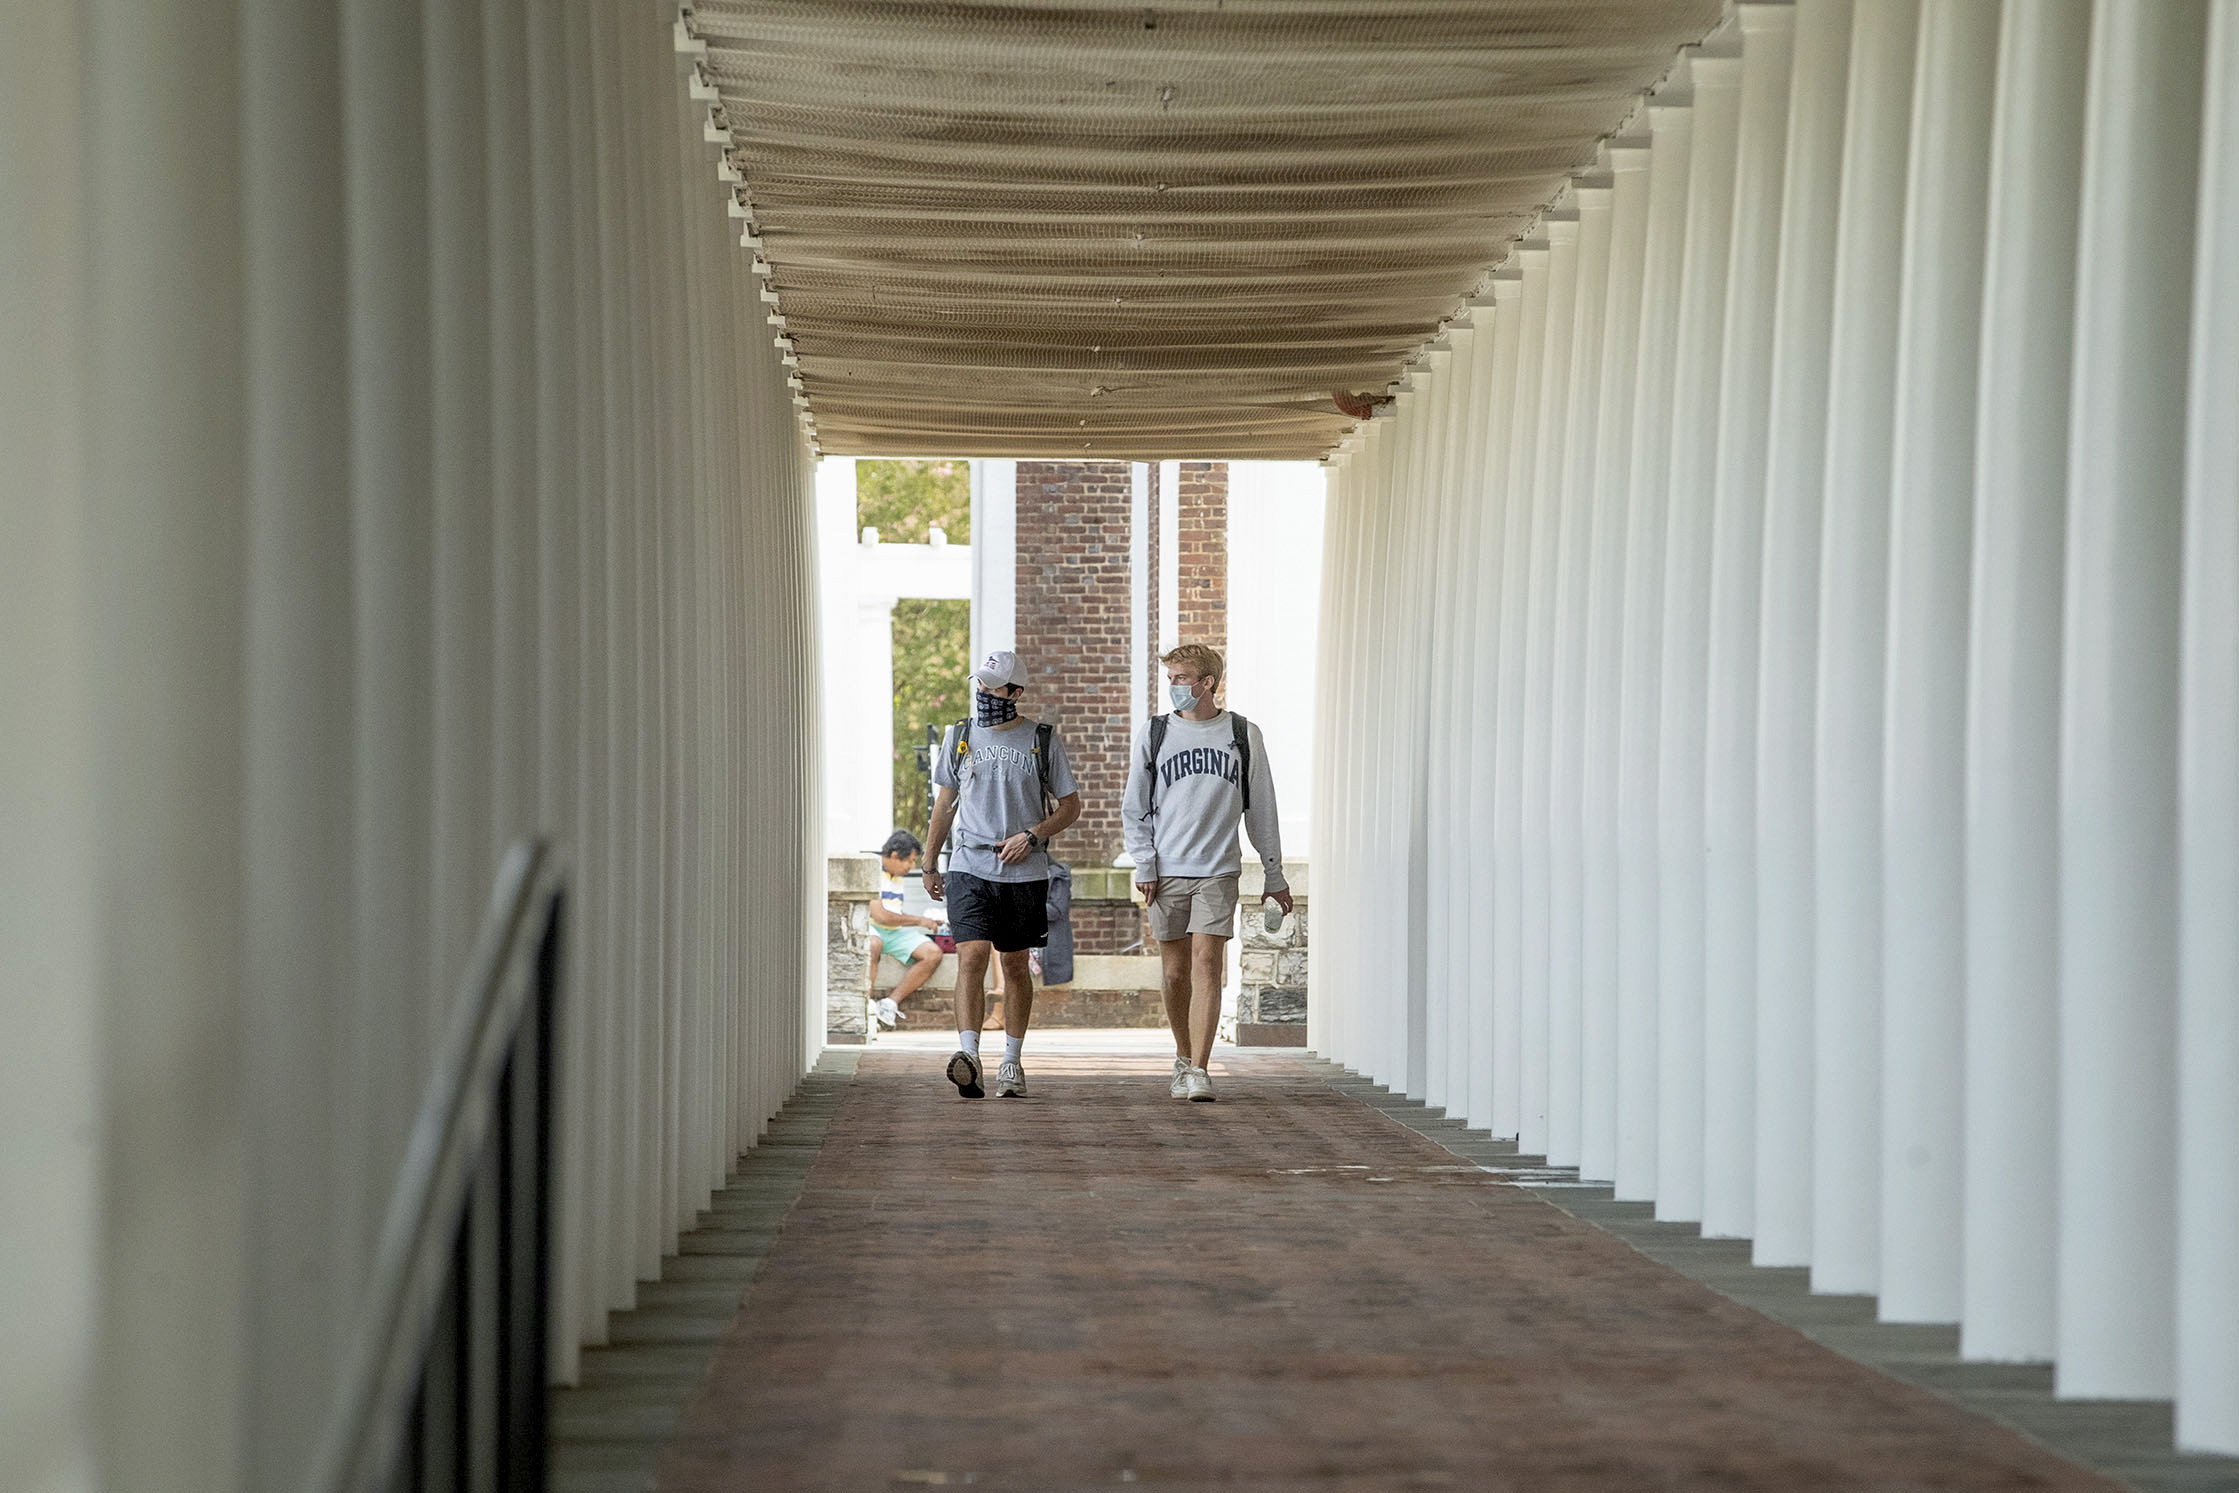 Students walking on a sidewalk lined with white columns